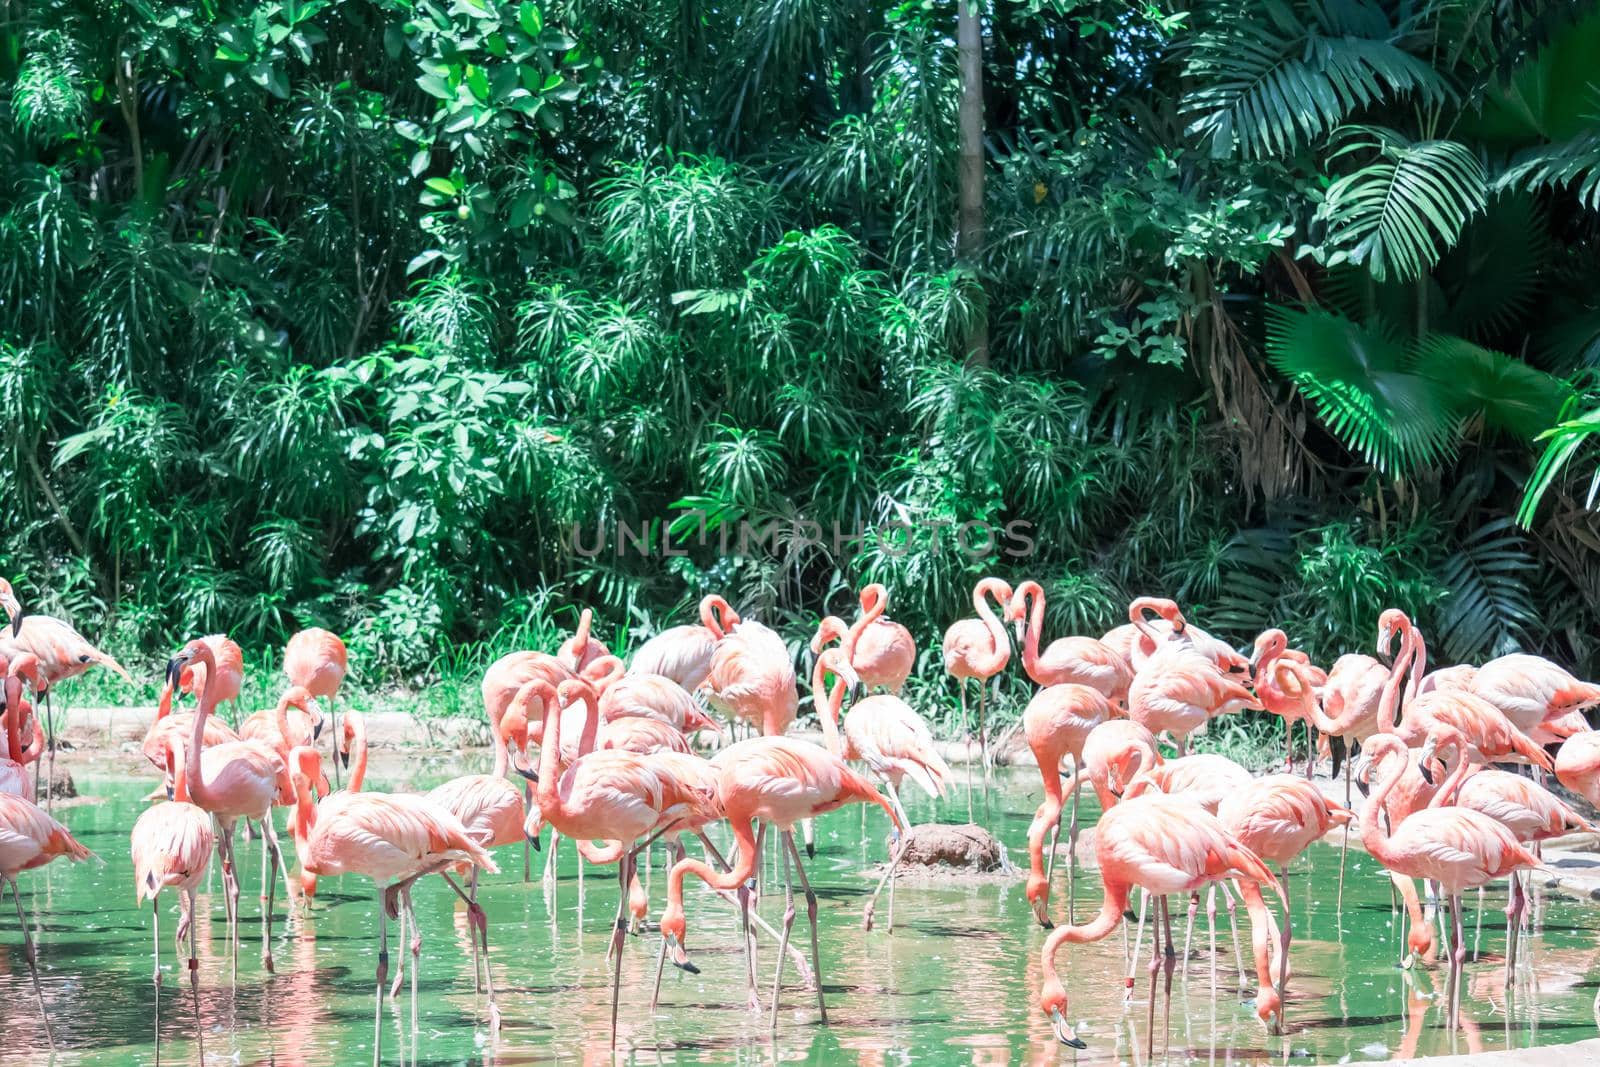 Greater Flamingos,phoenicopterus roseus, standing in the river water